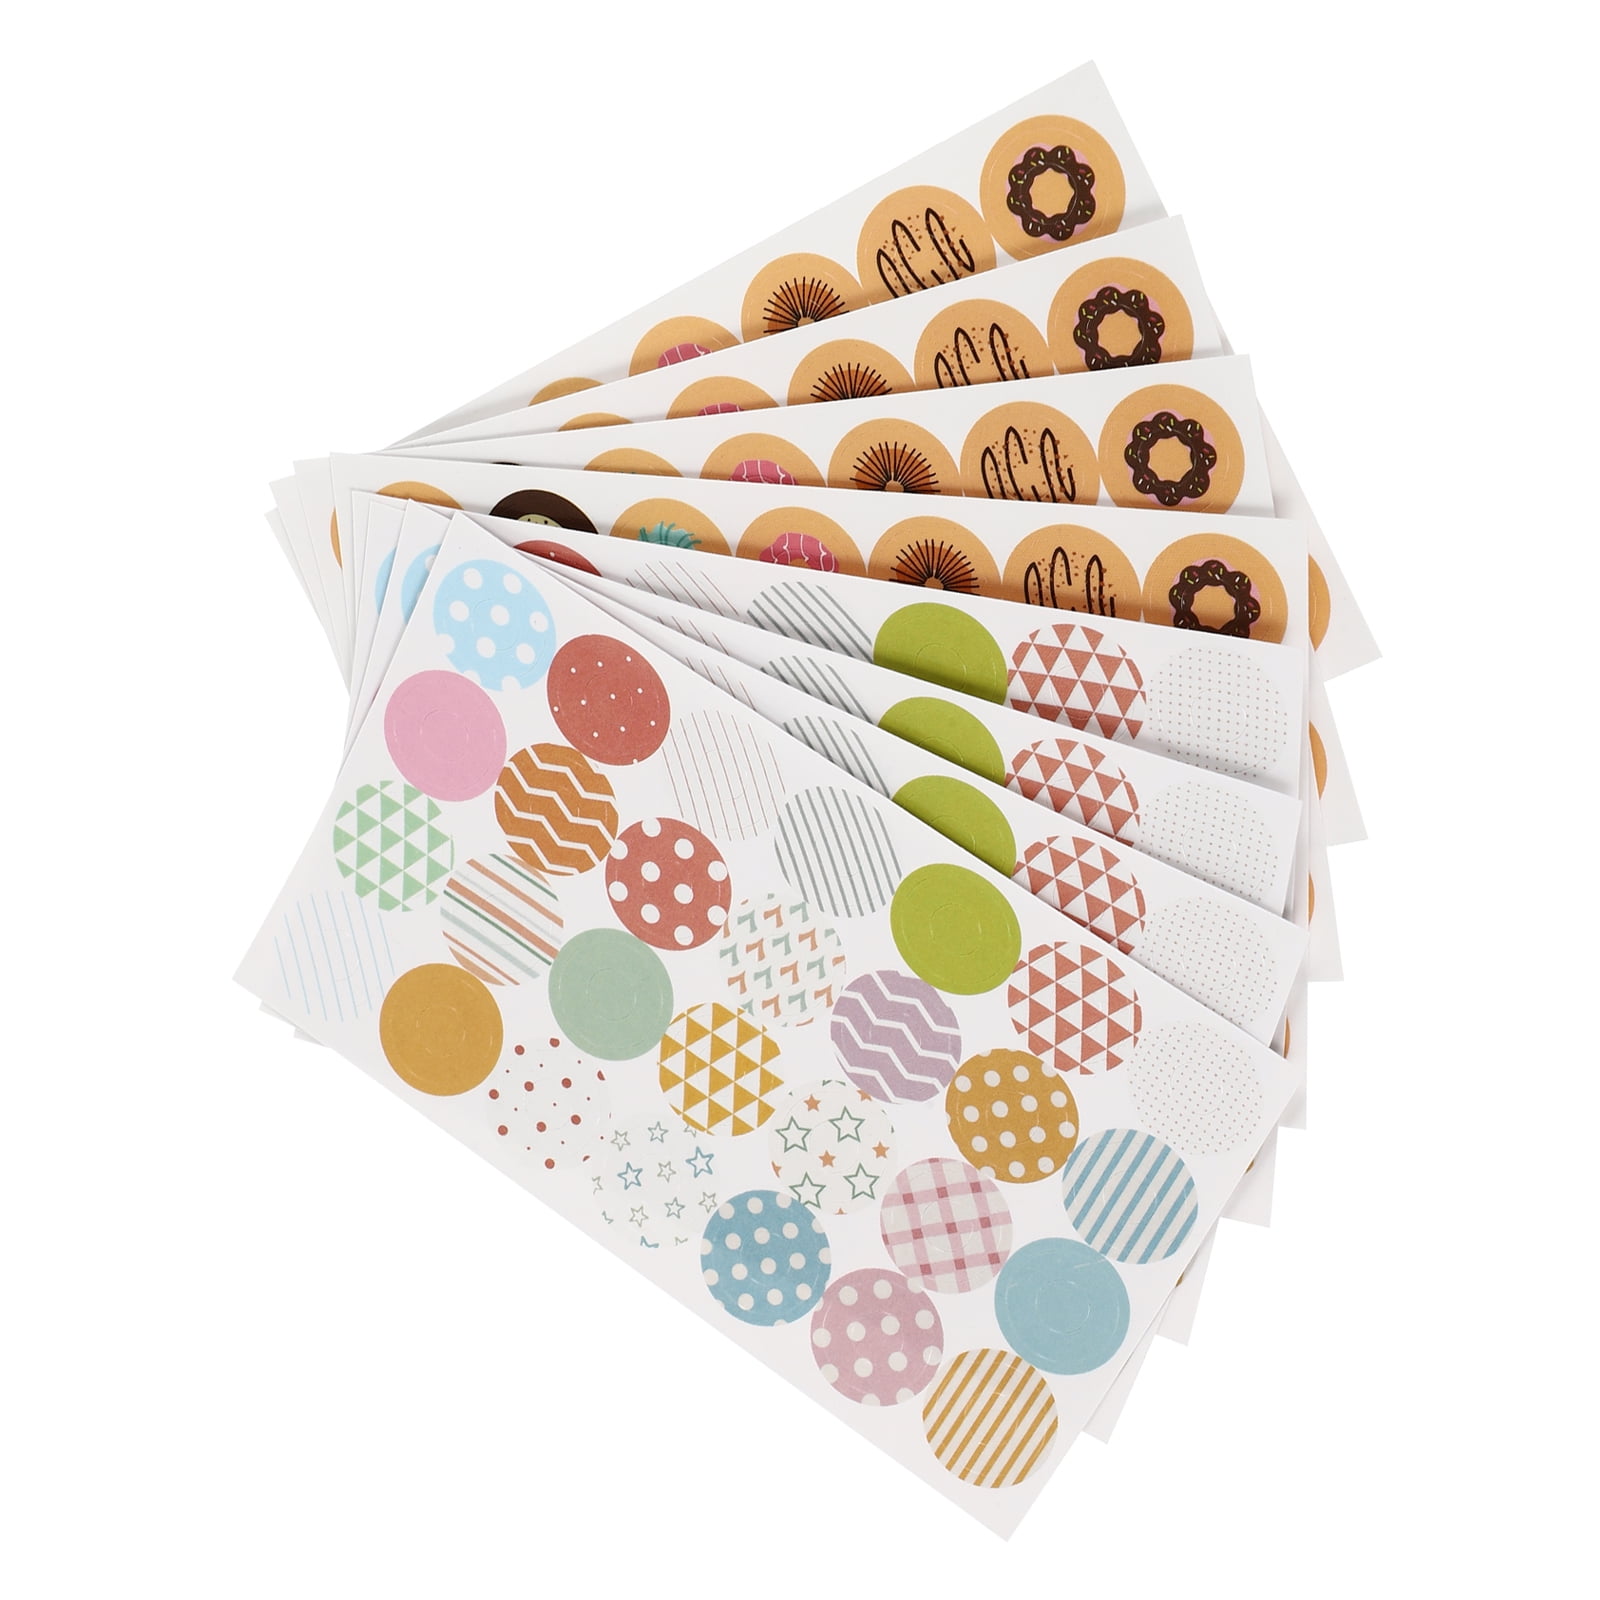 Fashion Self-Adhesive Loose-leaf Paper Hole Reinforcement Stickers Labels, Round, Galaxy Pattern, 1008 Pieces